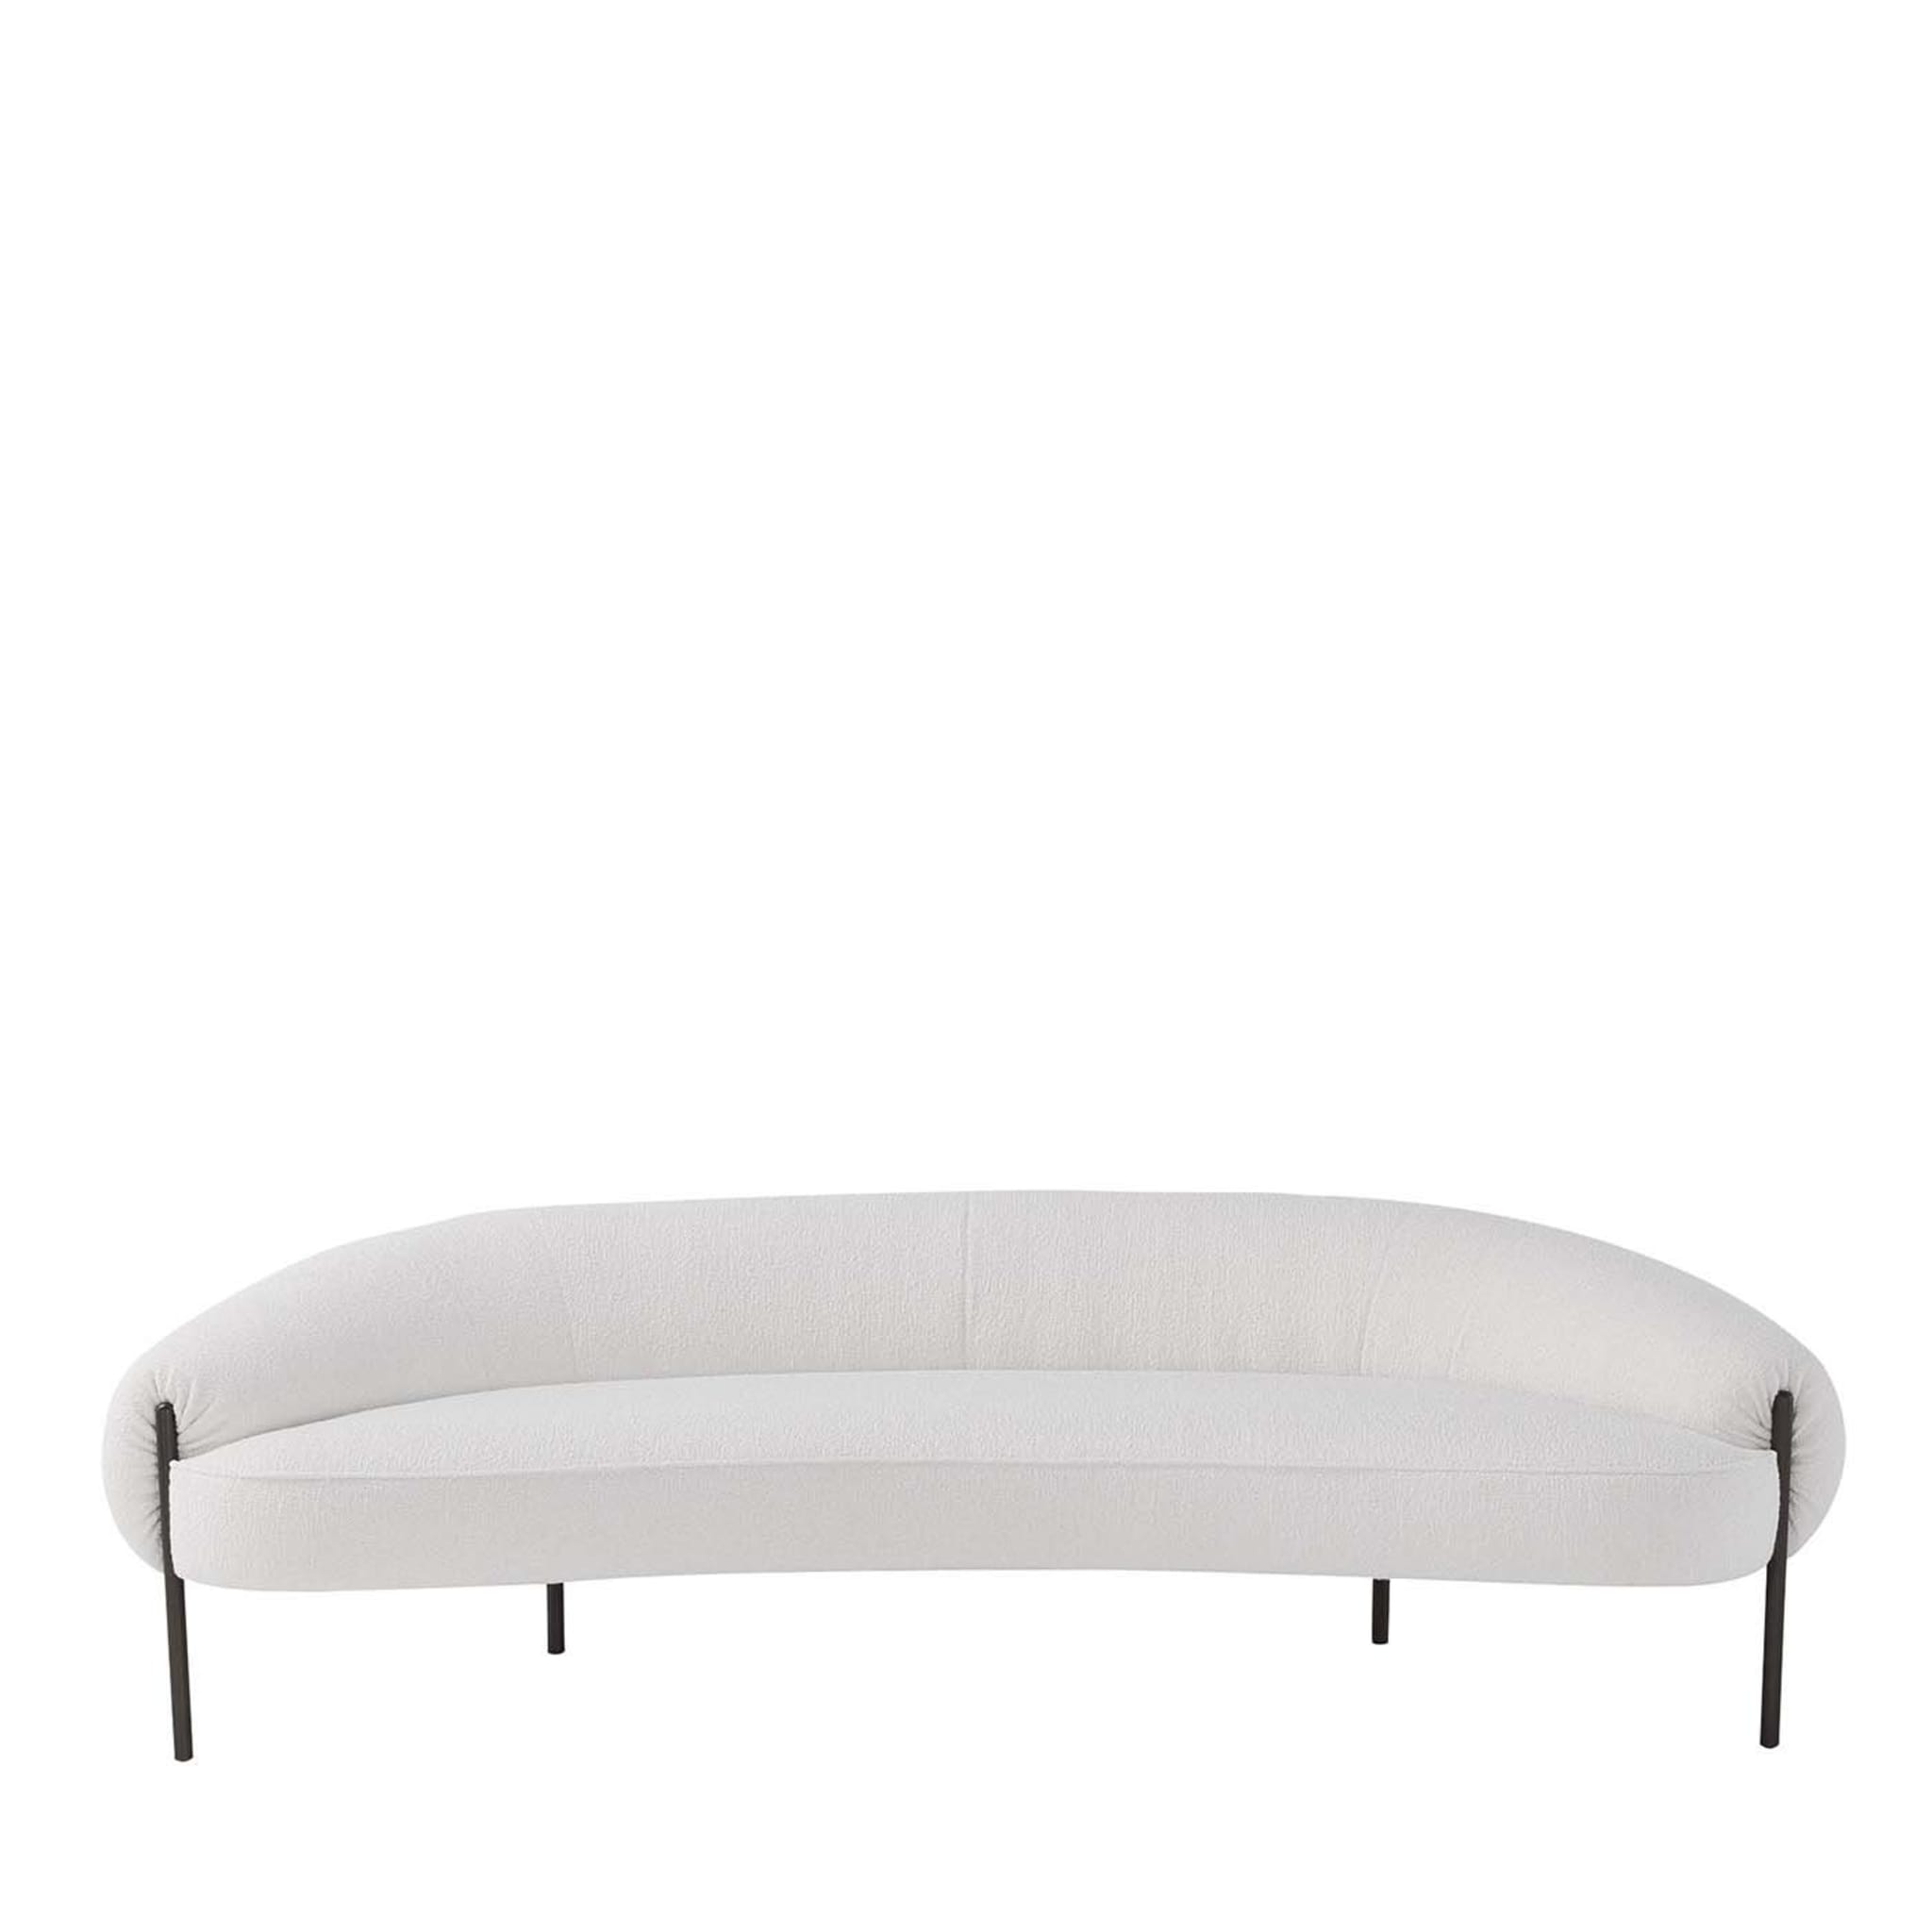 Isola Sofa By Lucy Kurrein - Main view